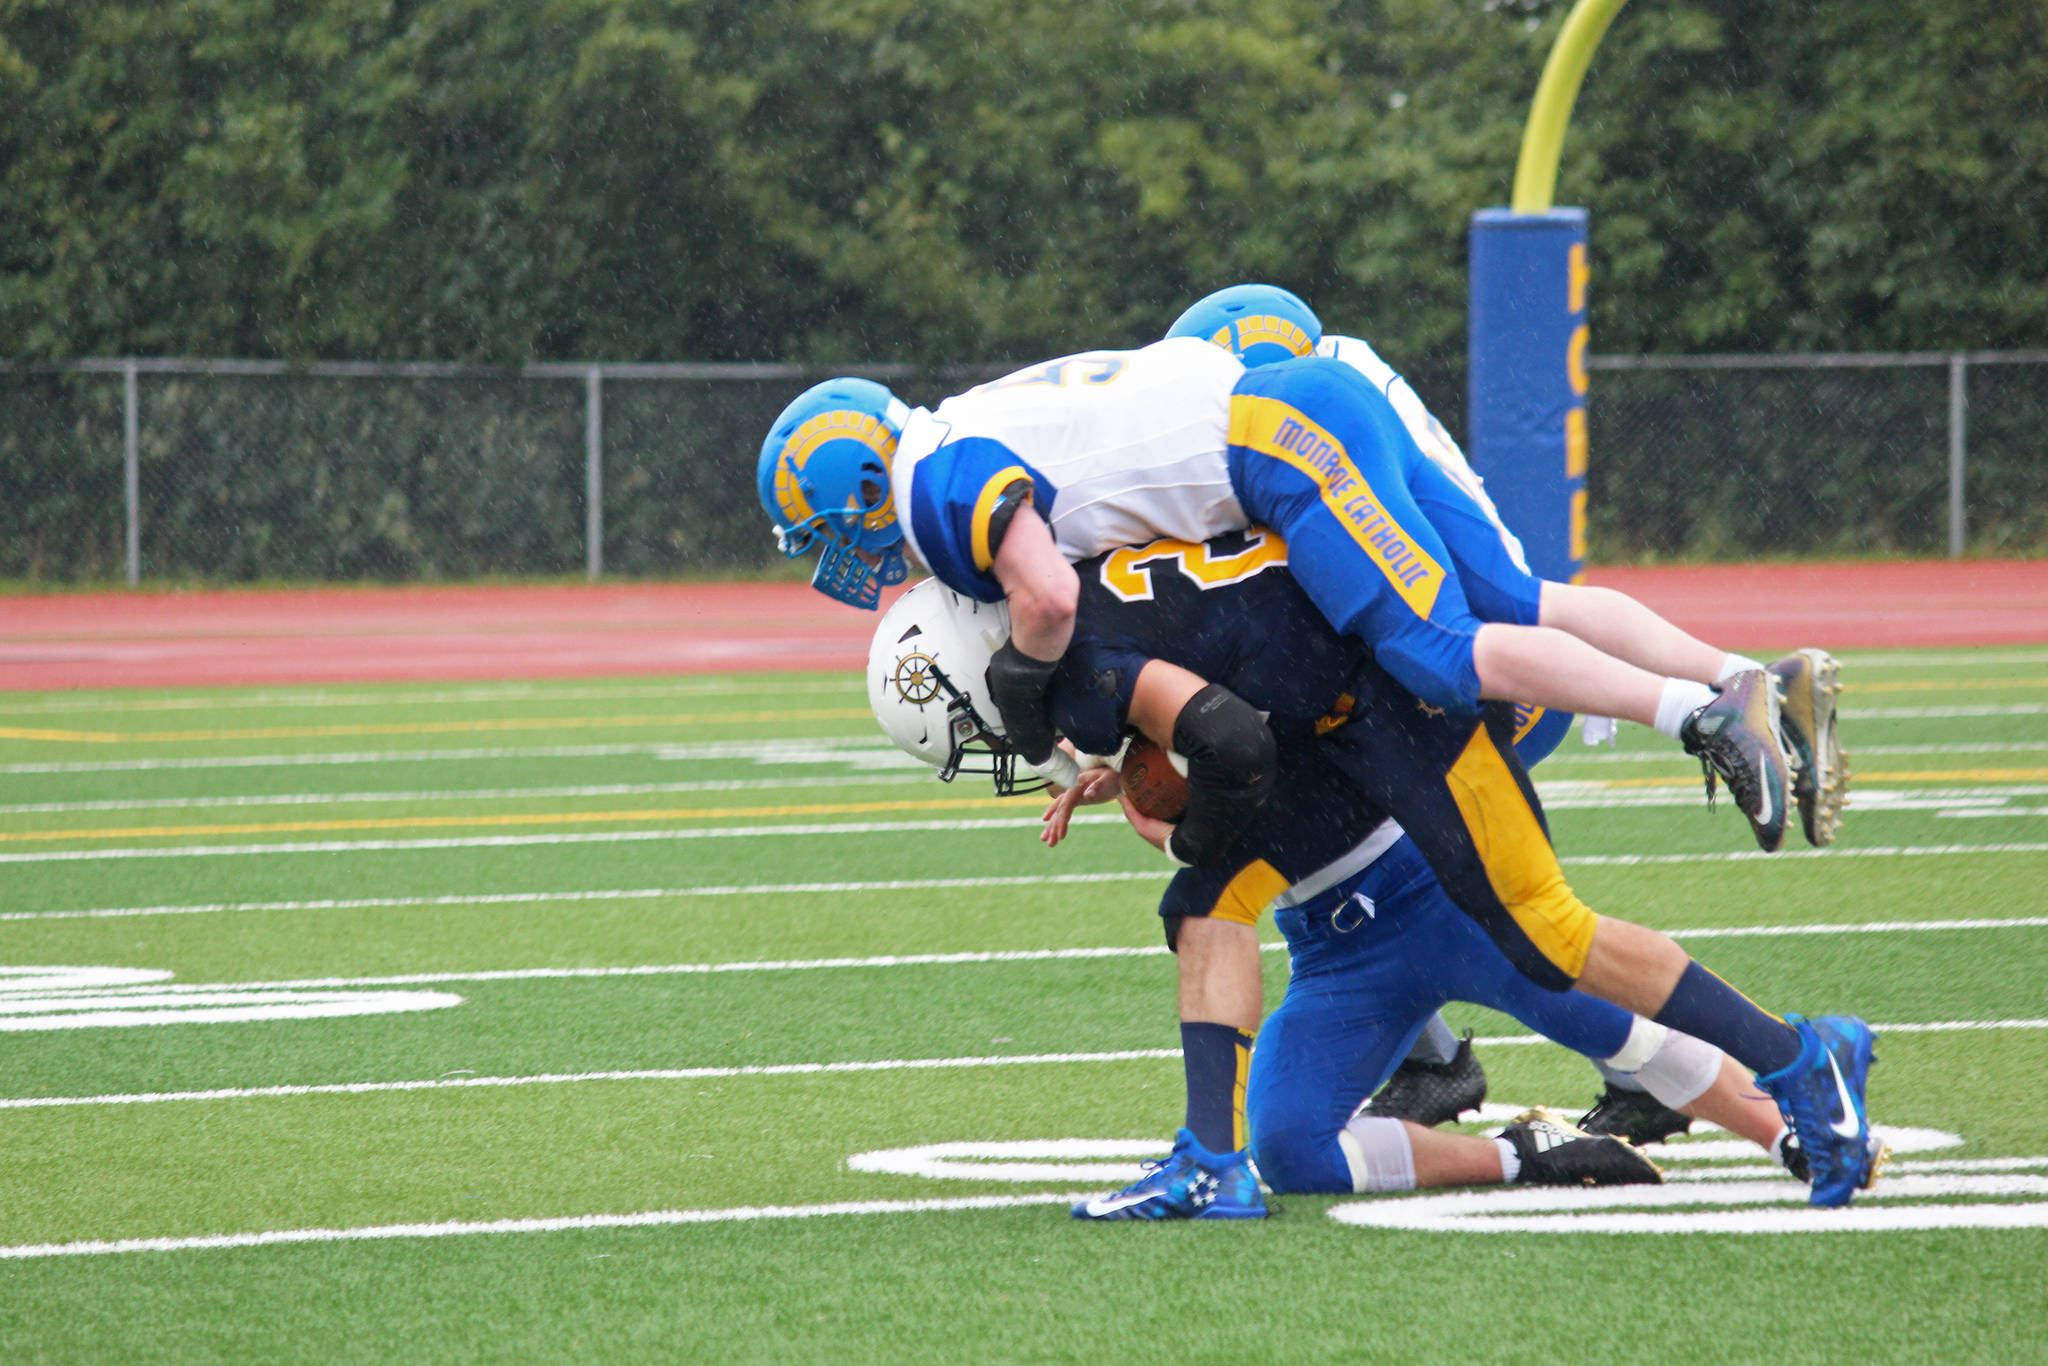 Homer junior Noah Fisk hoists a Monroe Cathloic High School player trying to tackle him as he runs the ball during their Saturday, Aug. 25, 2018 game at the high school’s turf field in Homer, Alaska. Monroe eked out a slim win over the Mariners 28-27. (Photo by Megan Pacer/Homer News)